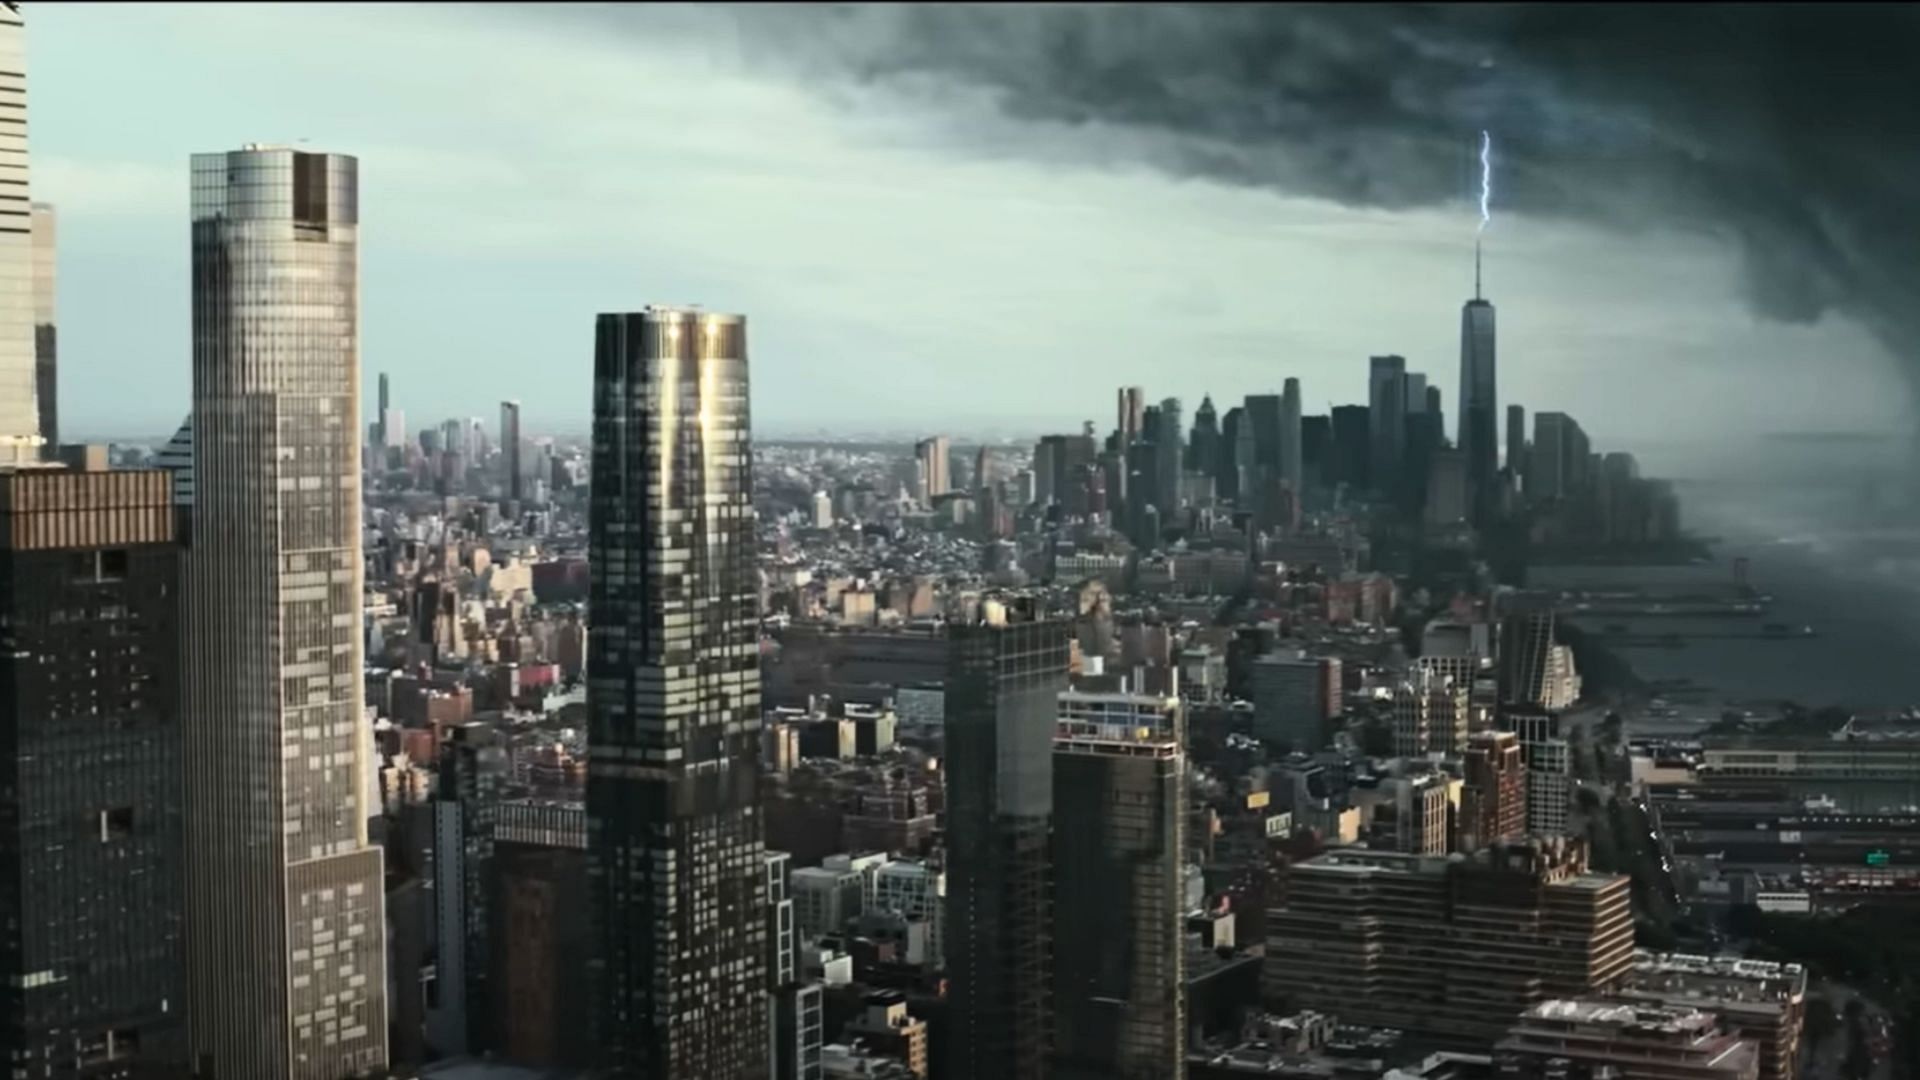 The city was under threat of permanent damage (Image via Sony)